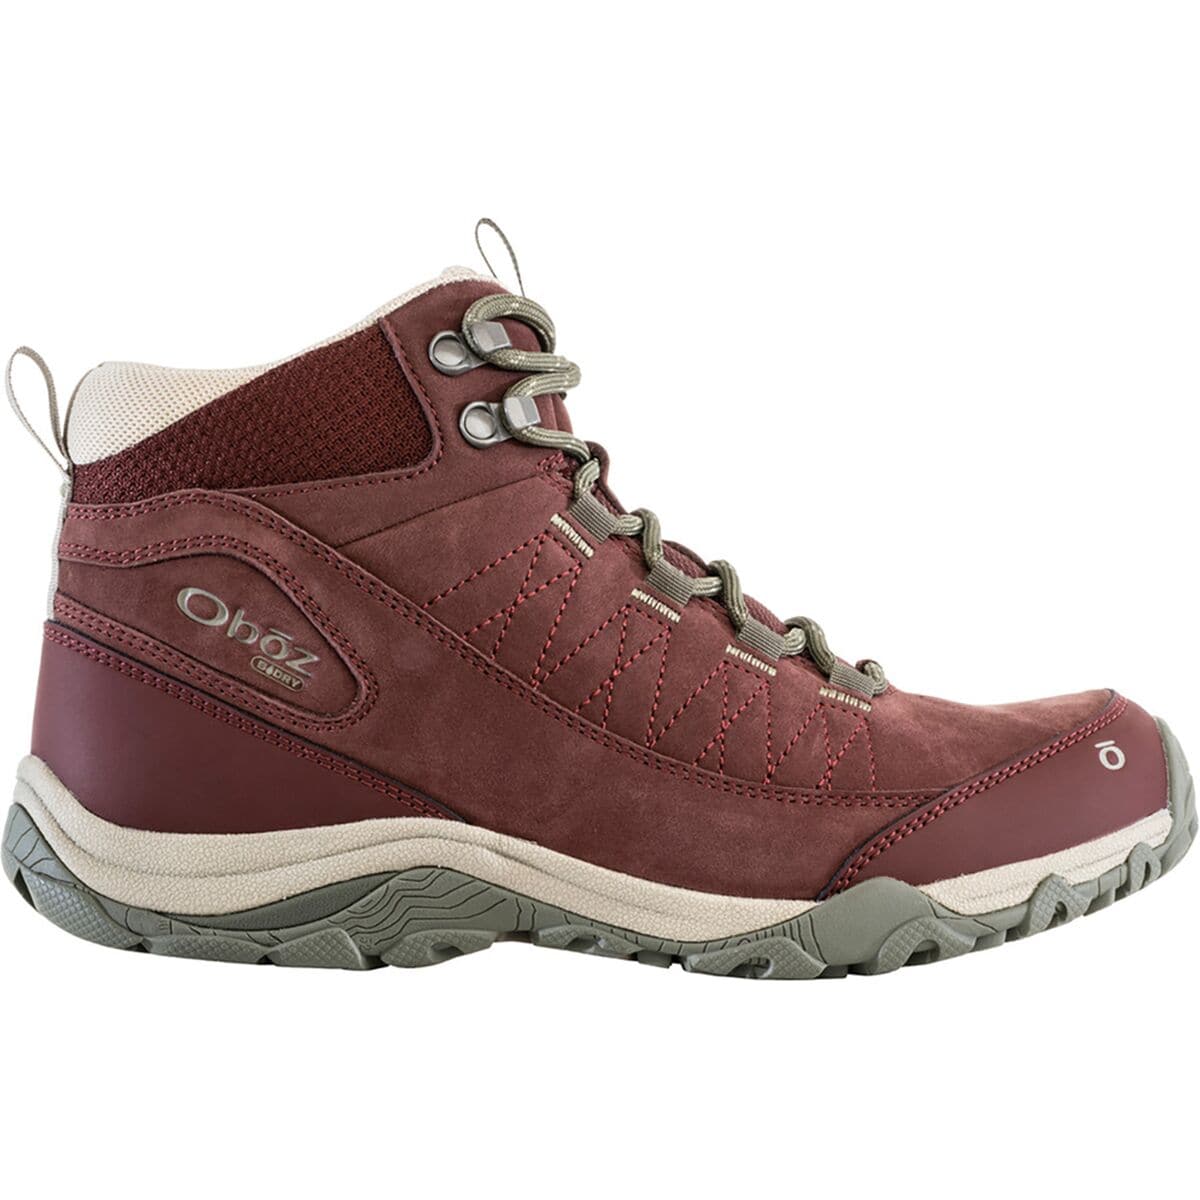 Ousel Mid B-DRY Wide Hiking Boot - Women